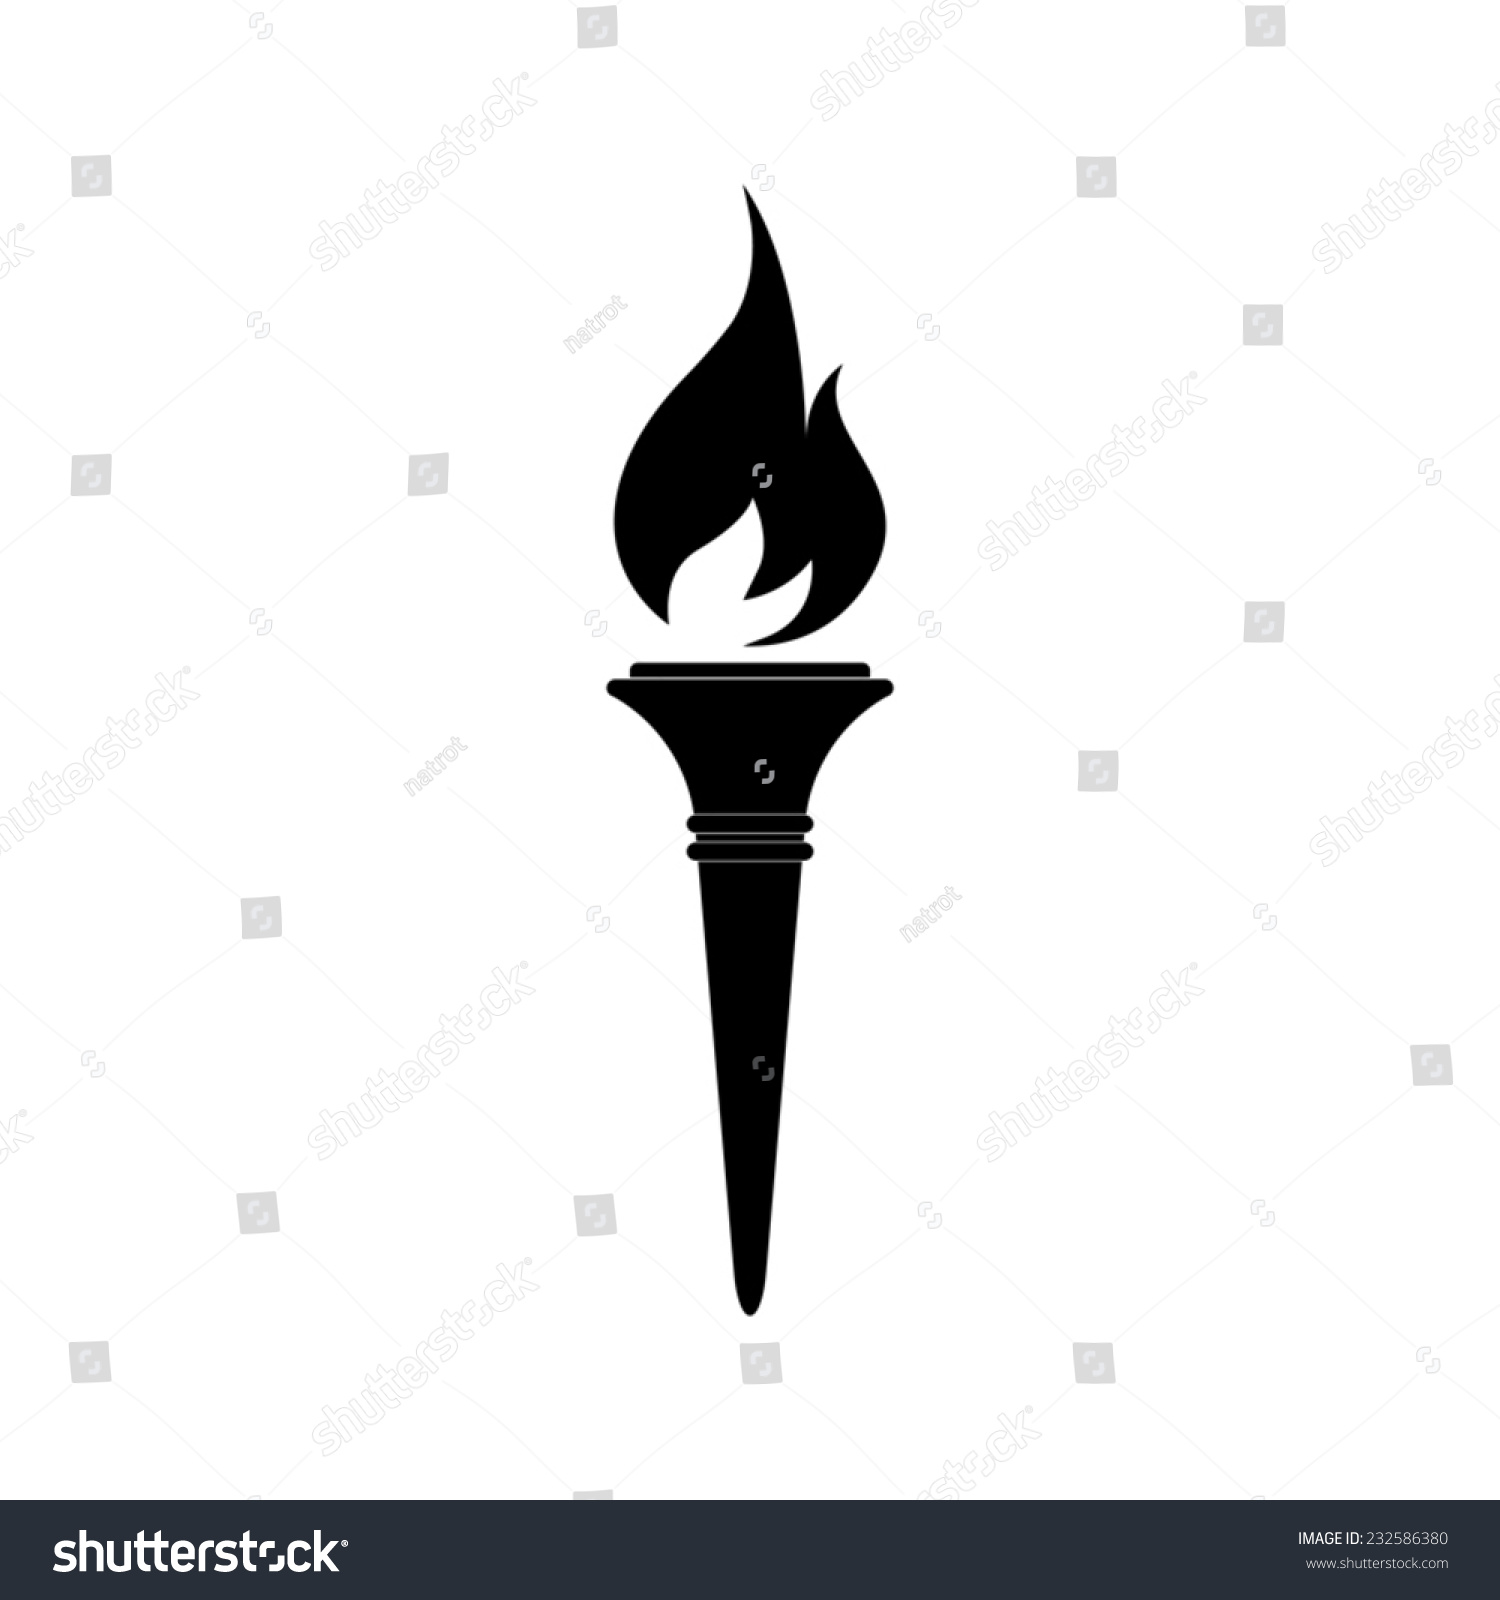 vector clipart torch - photo #16